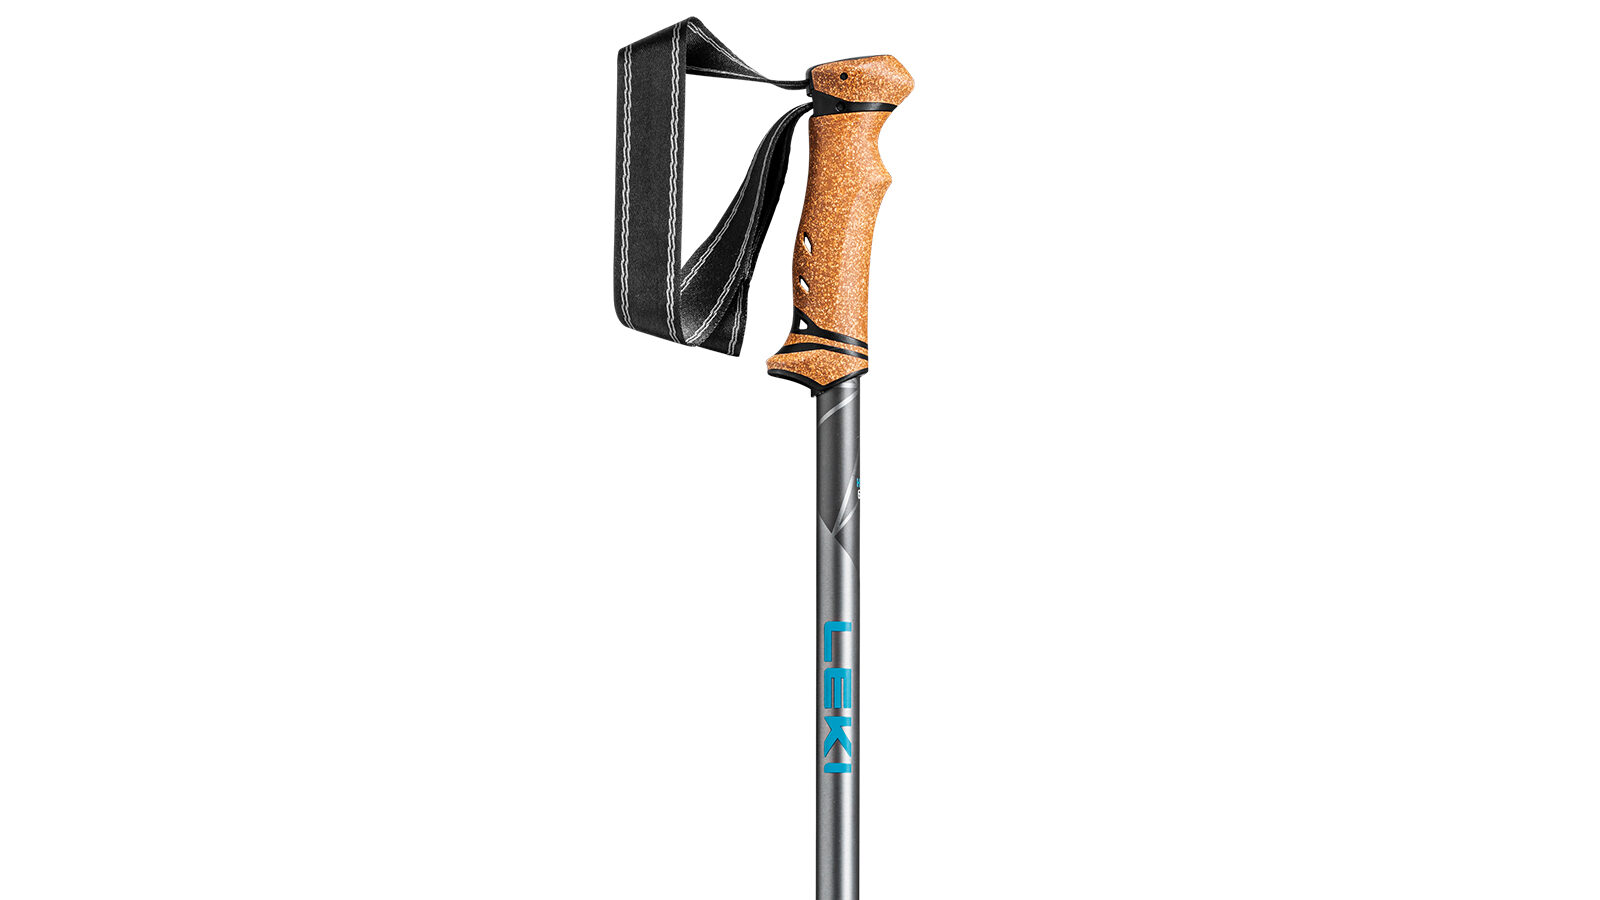 The Leki Legacy model is solid and functional, an ideal choice for people wondering which trekking poles to choose for their hikes.